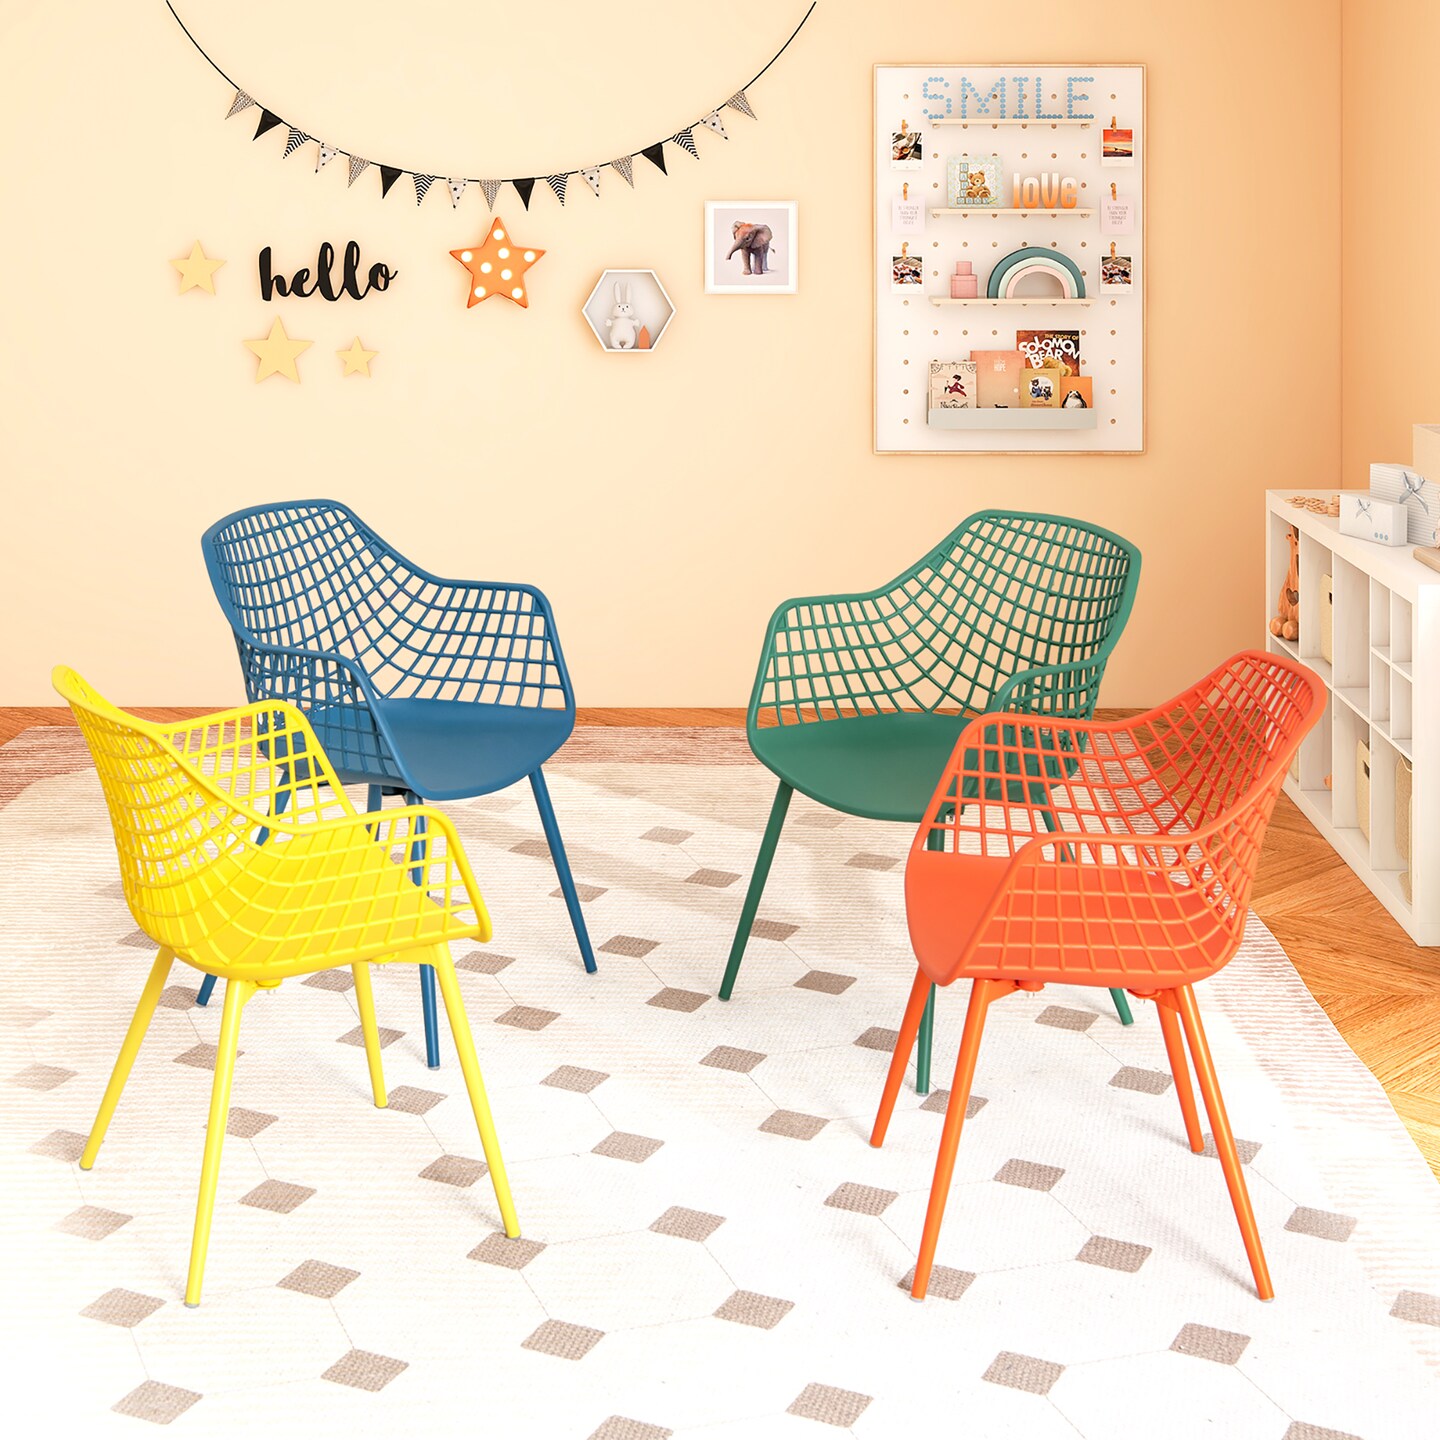 Costway 4 PCS Kids Chair Set Child-Size Chairs with Metal Legs Toddler Furniture Colorful